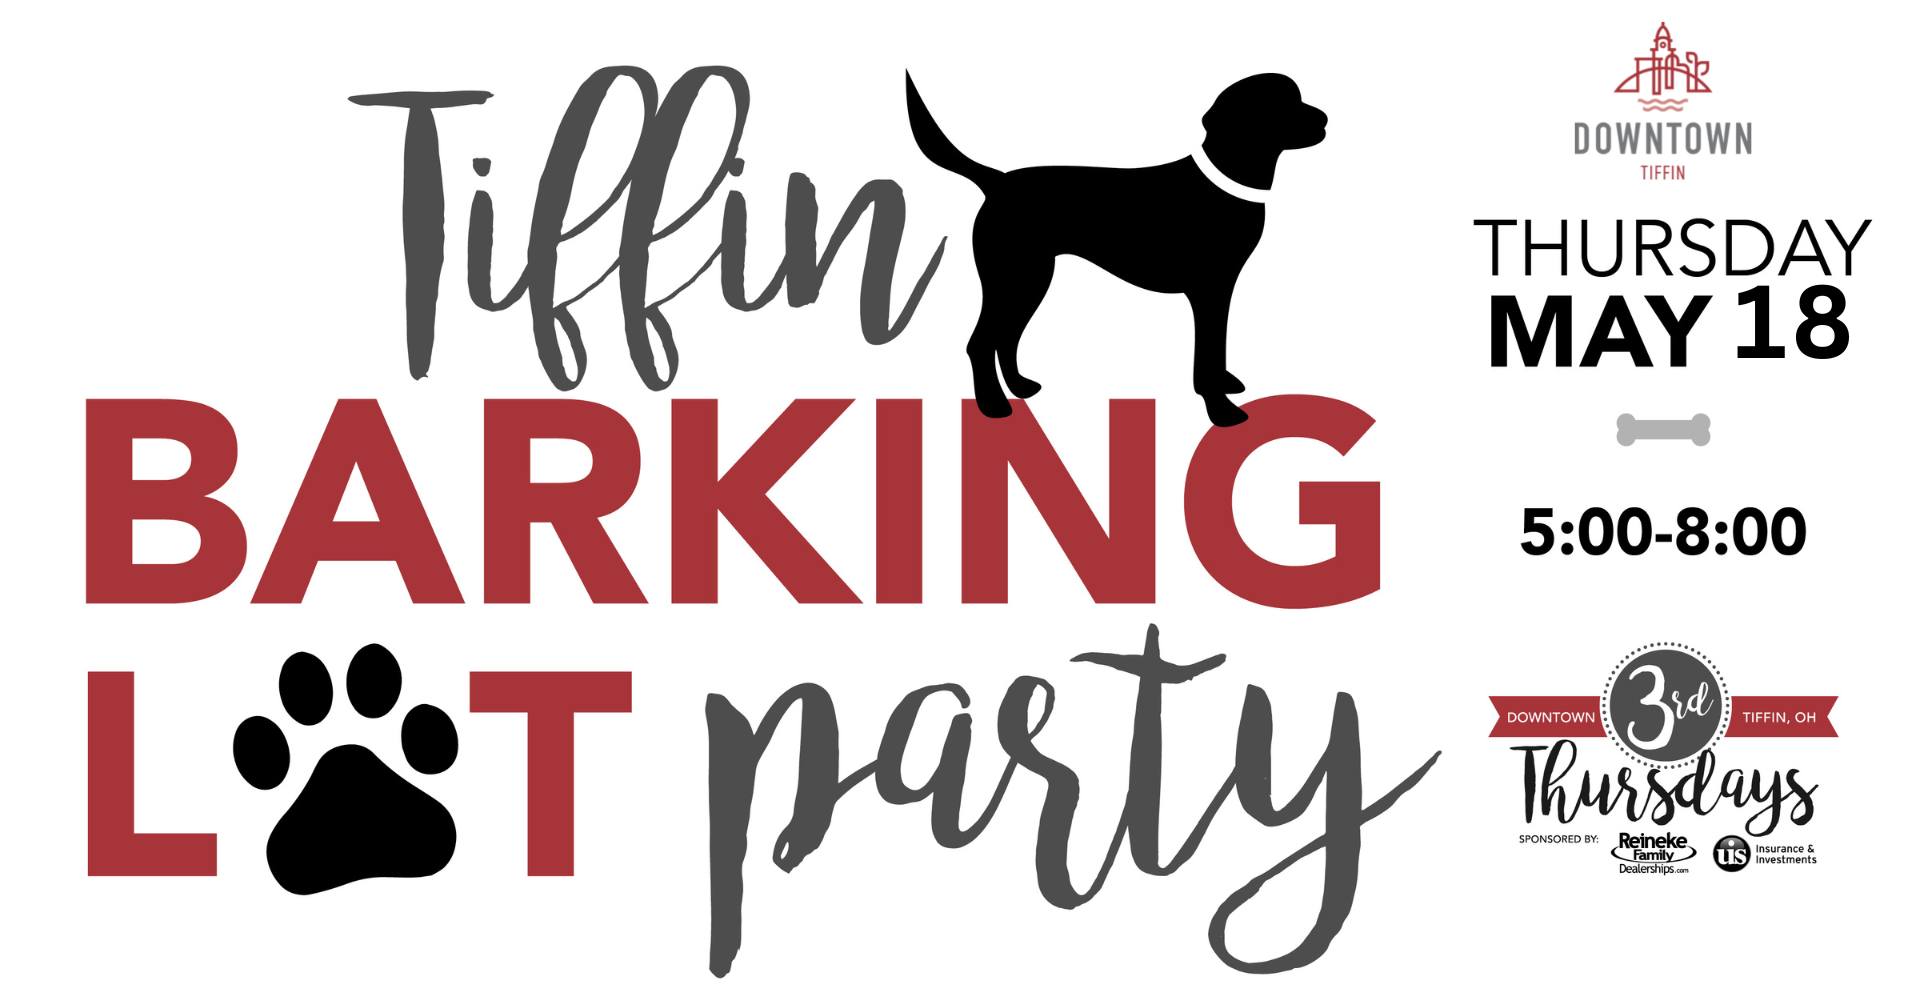 Third Thursday Series | Barking Lot Party